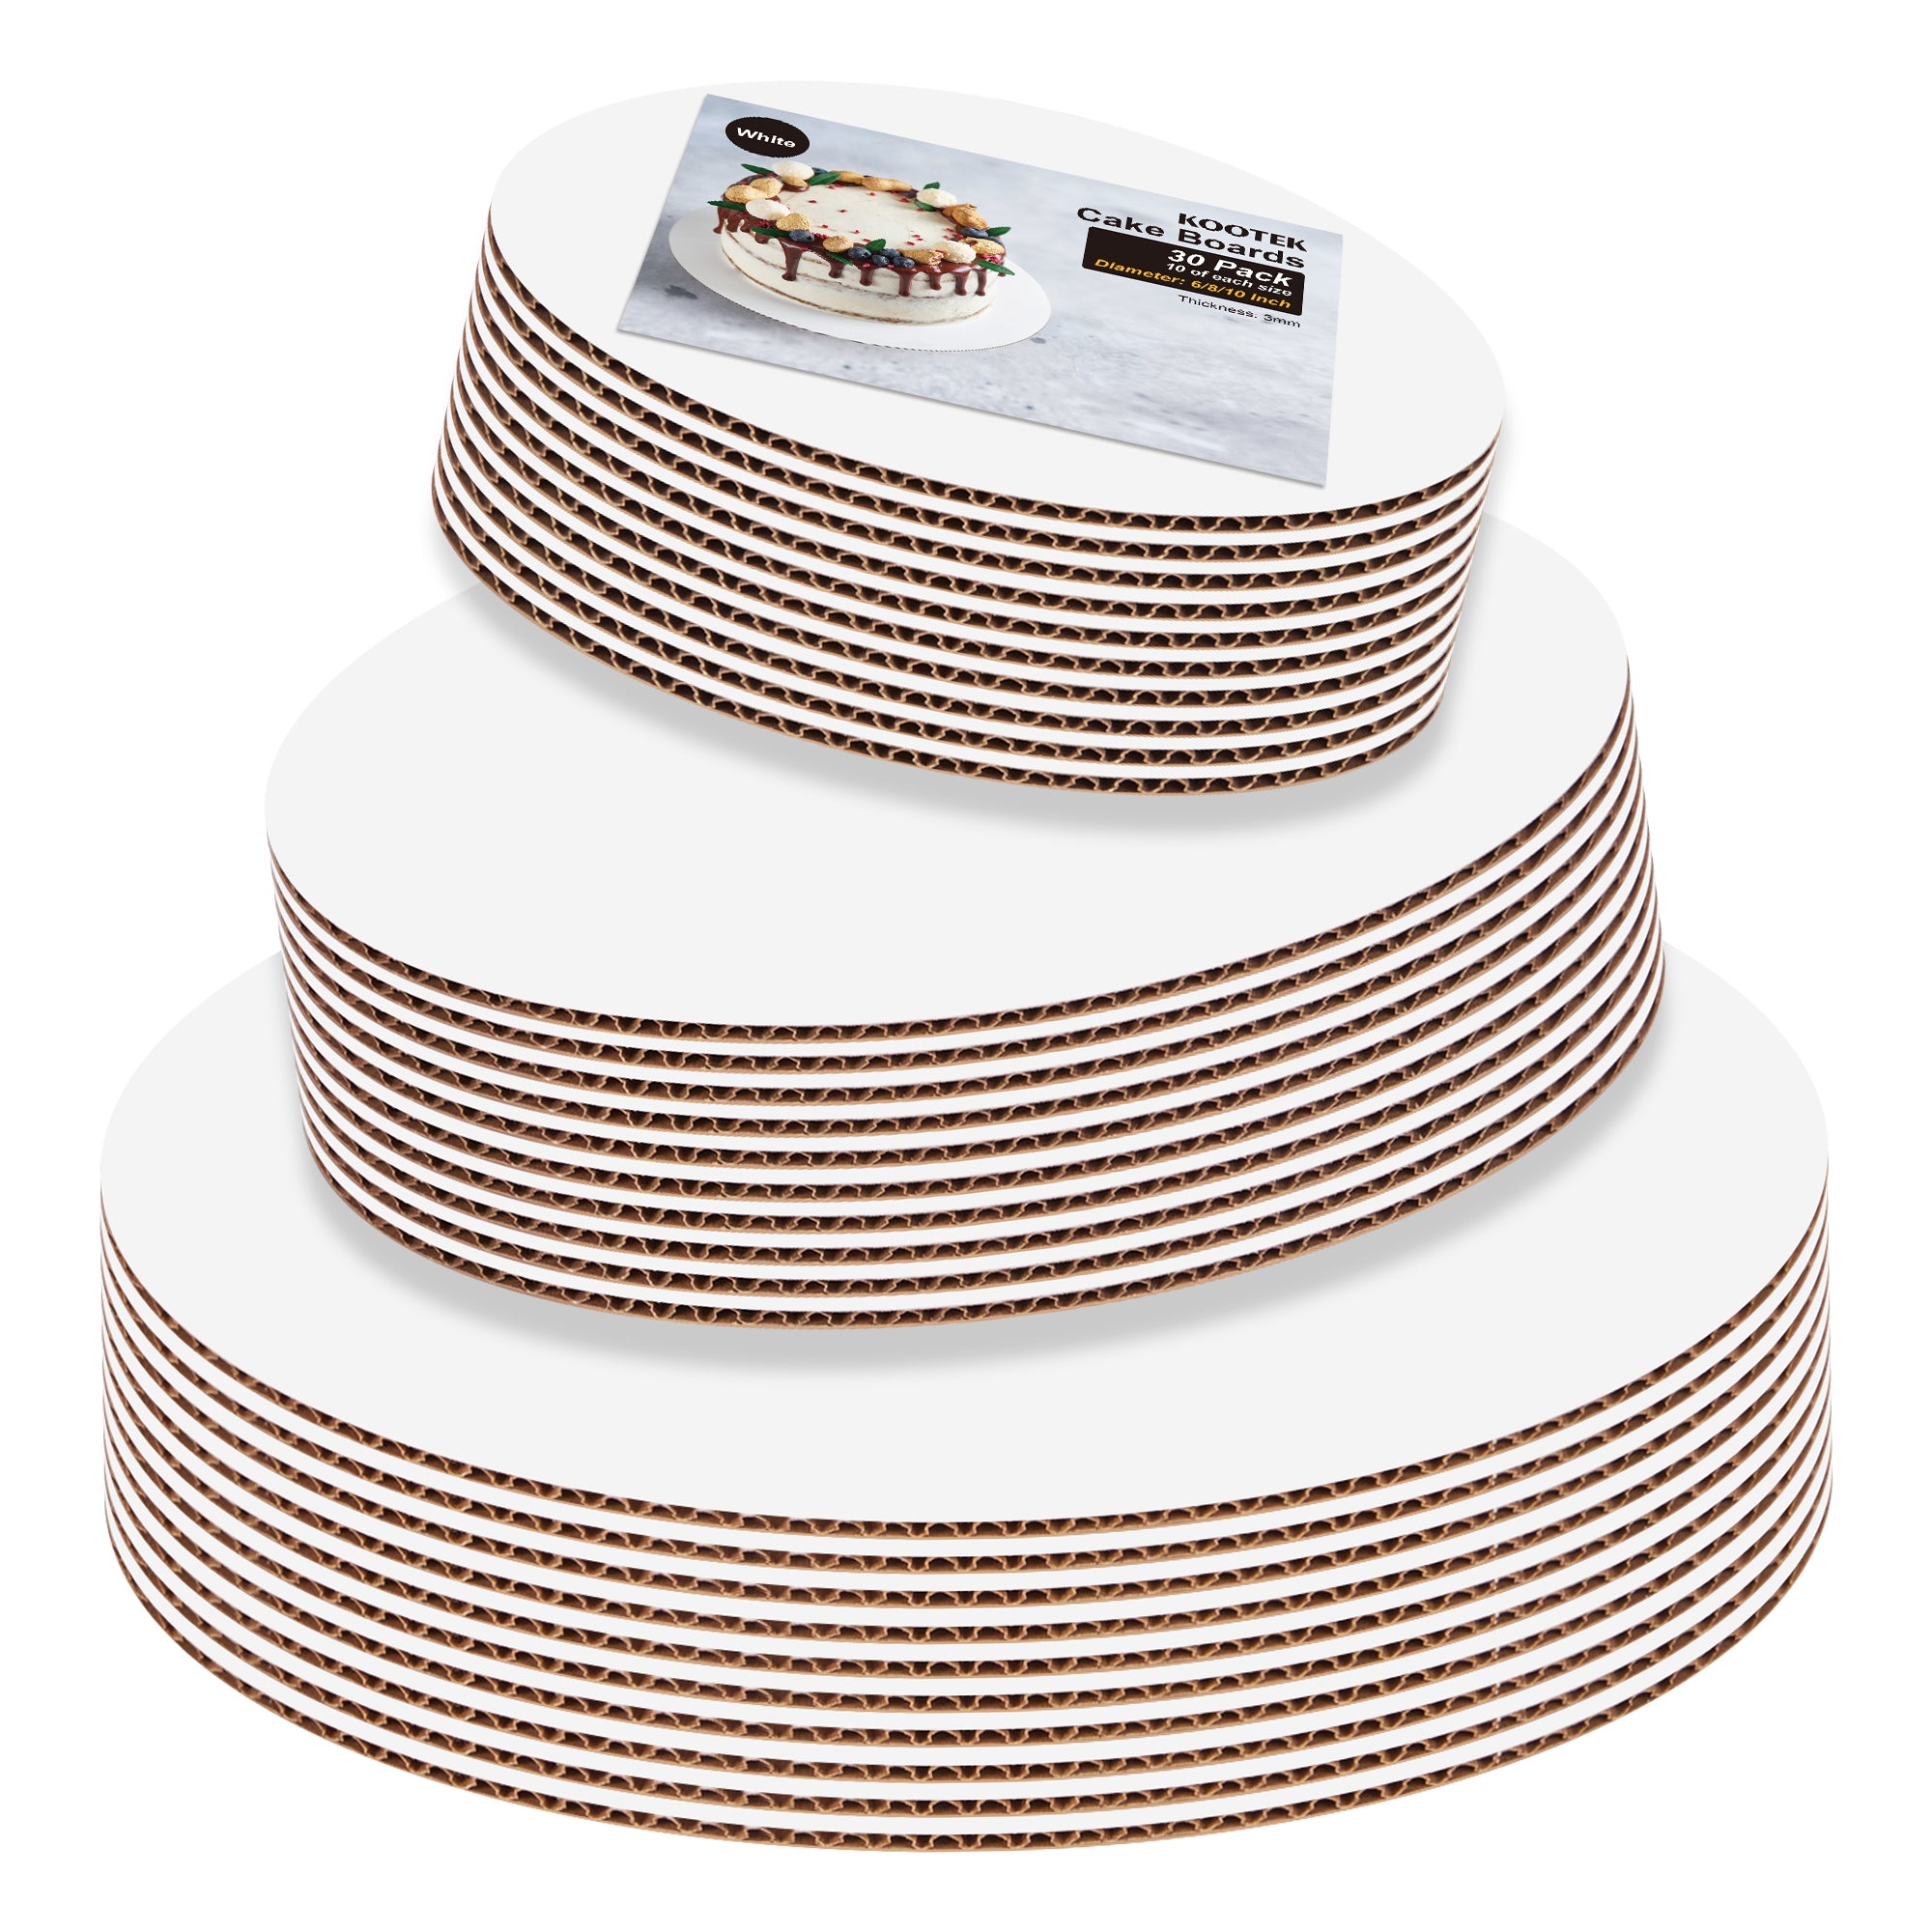 Kootek Cake Boards Round 30 Pack, Cake Decorating Kits Circle Cardboard Round Base 6, 8 and 10 inch, Cake Plate 10 of Each Size